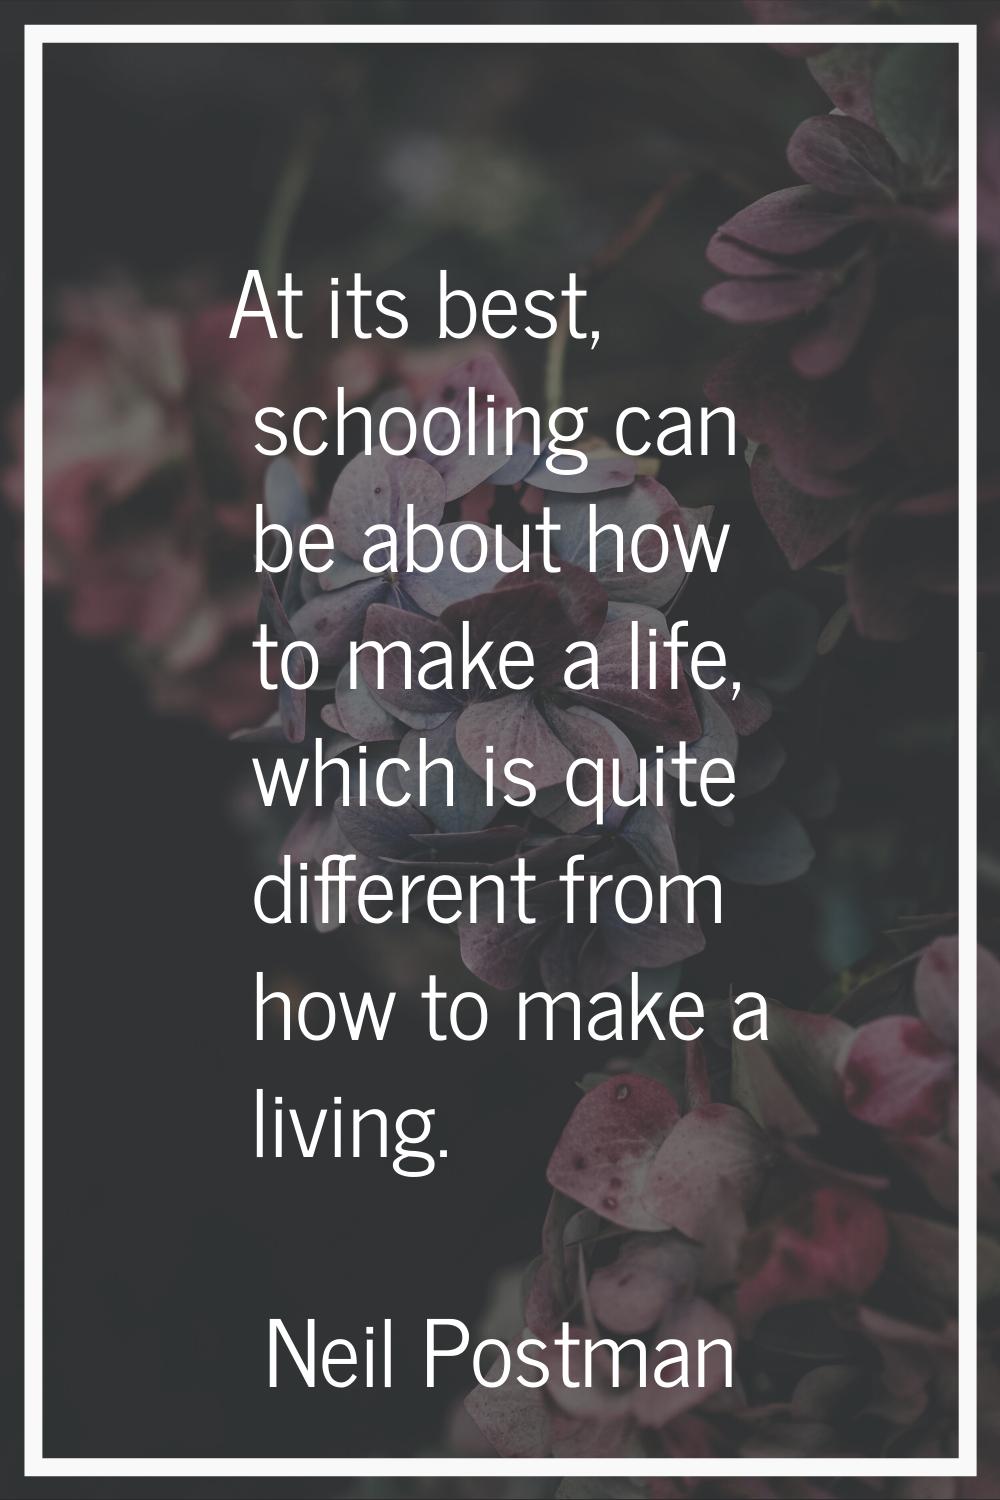 At its best, schooling can be about how to make a life, which is quite different from how to make a